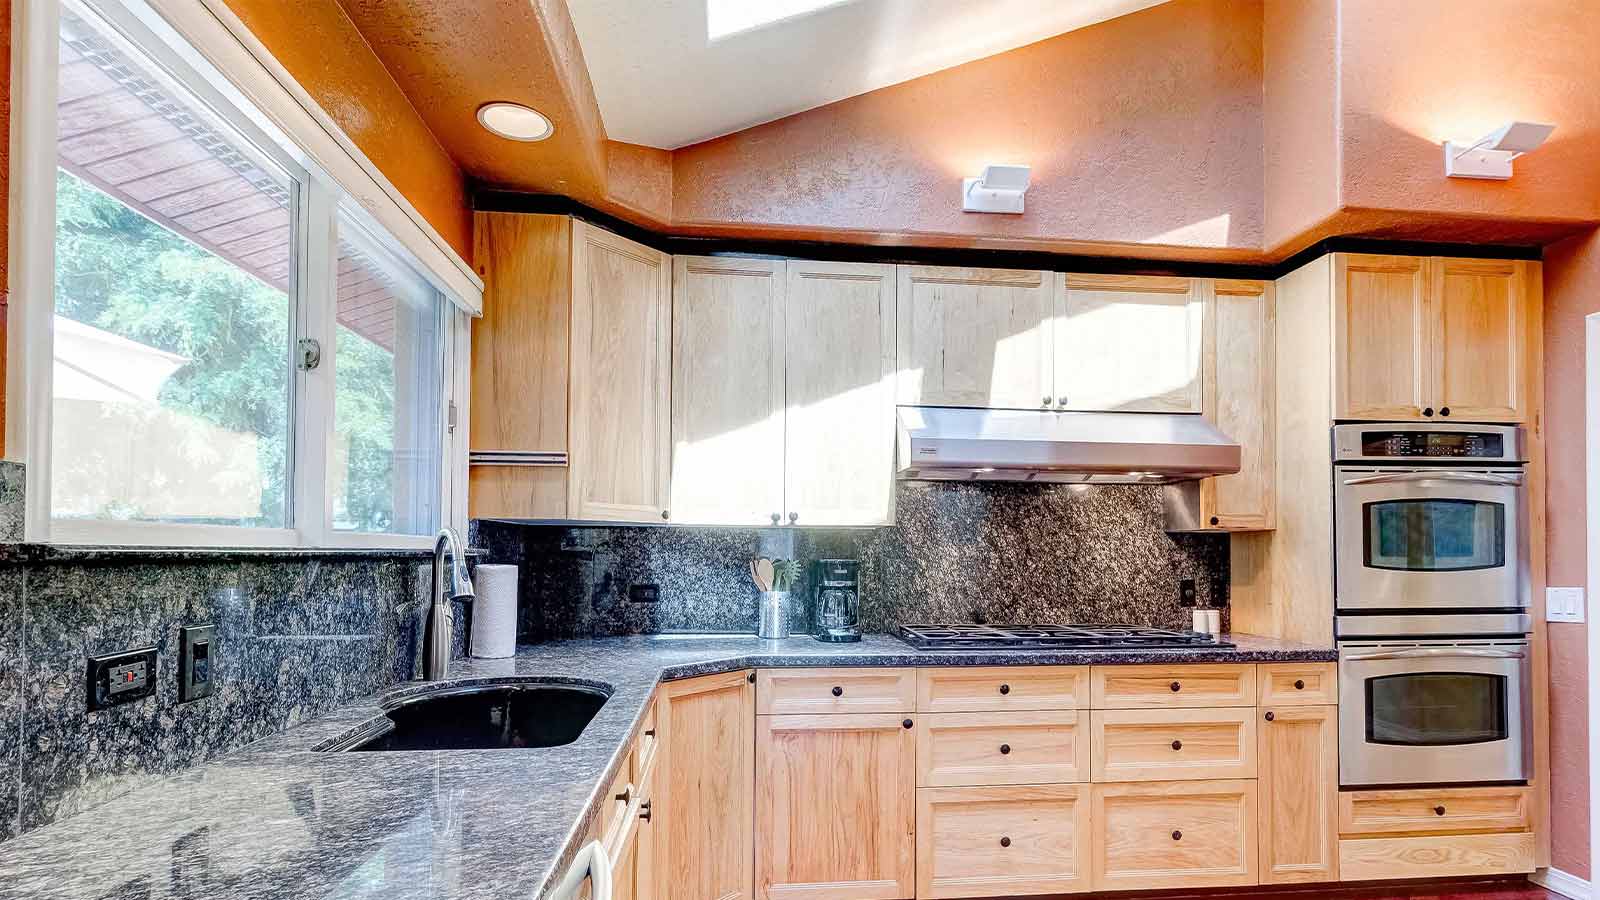 A sunny kitchen corner featuring natural wood cabinets and black granite countertops.